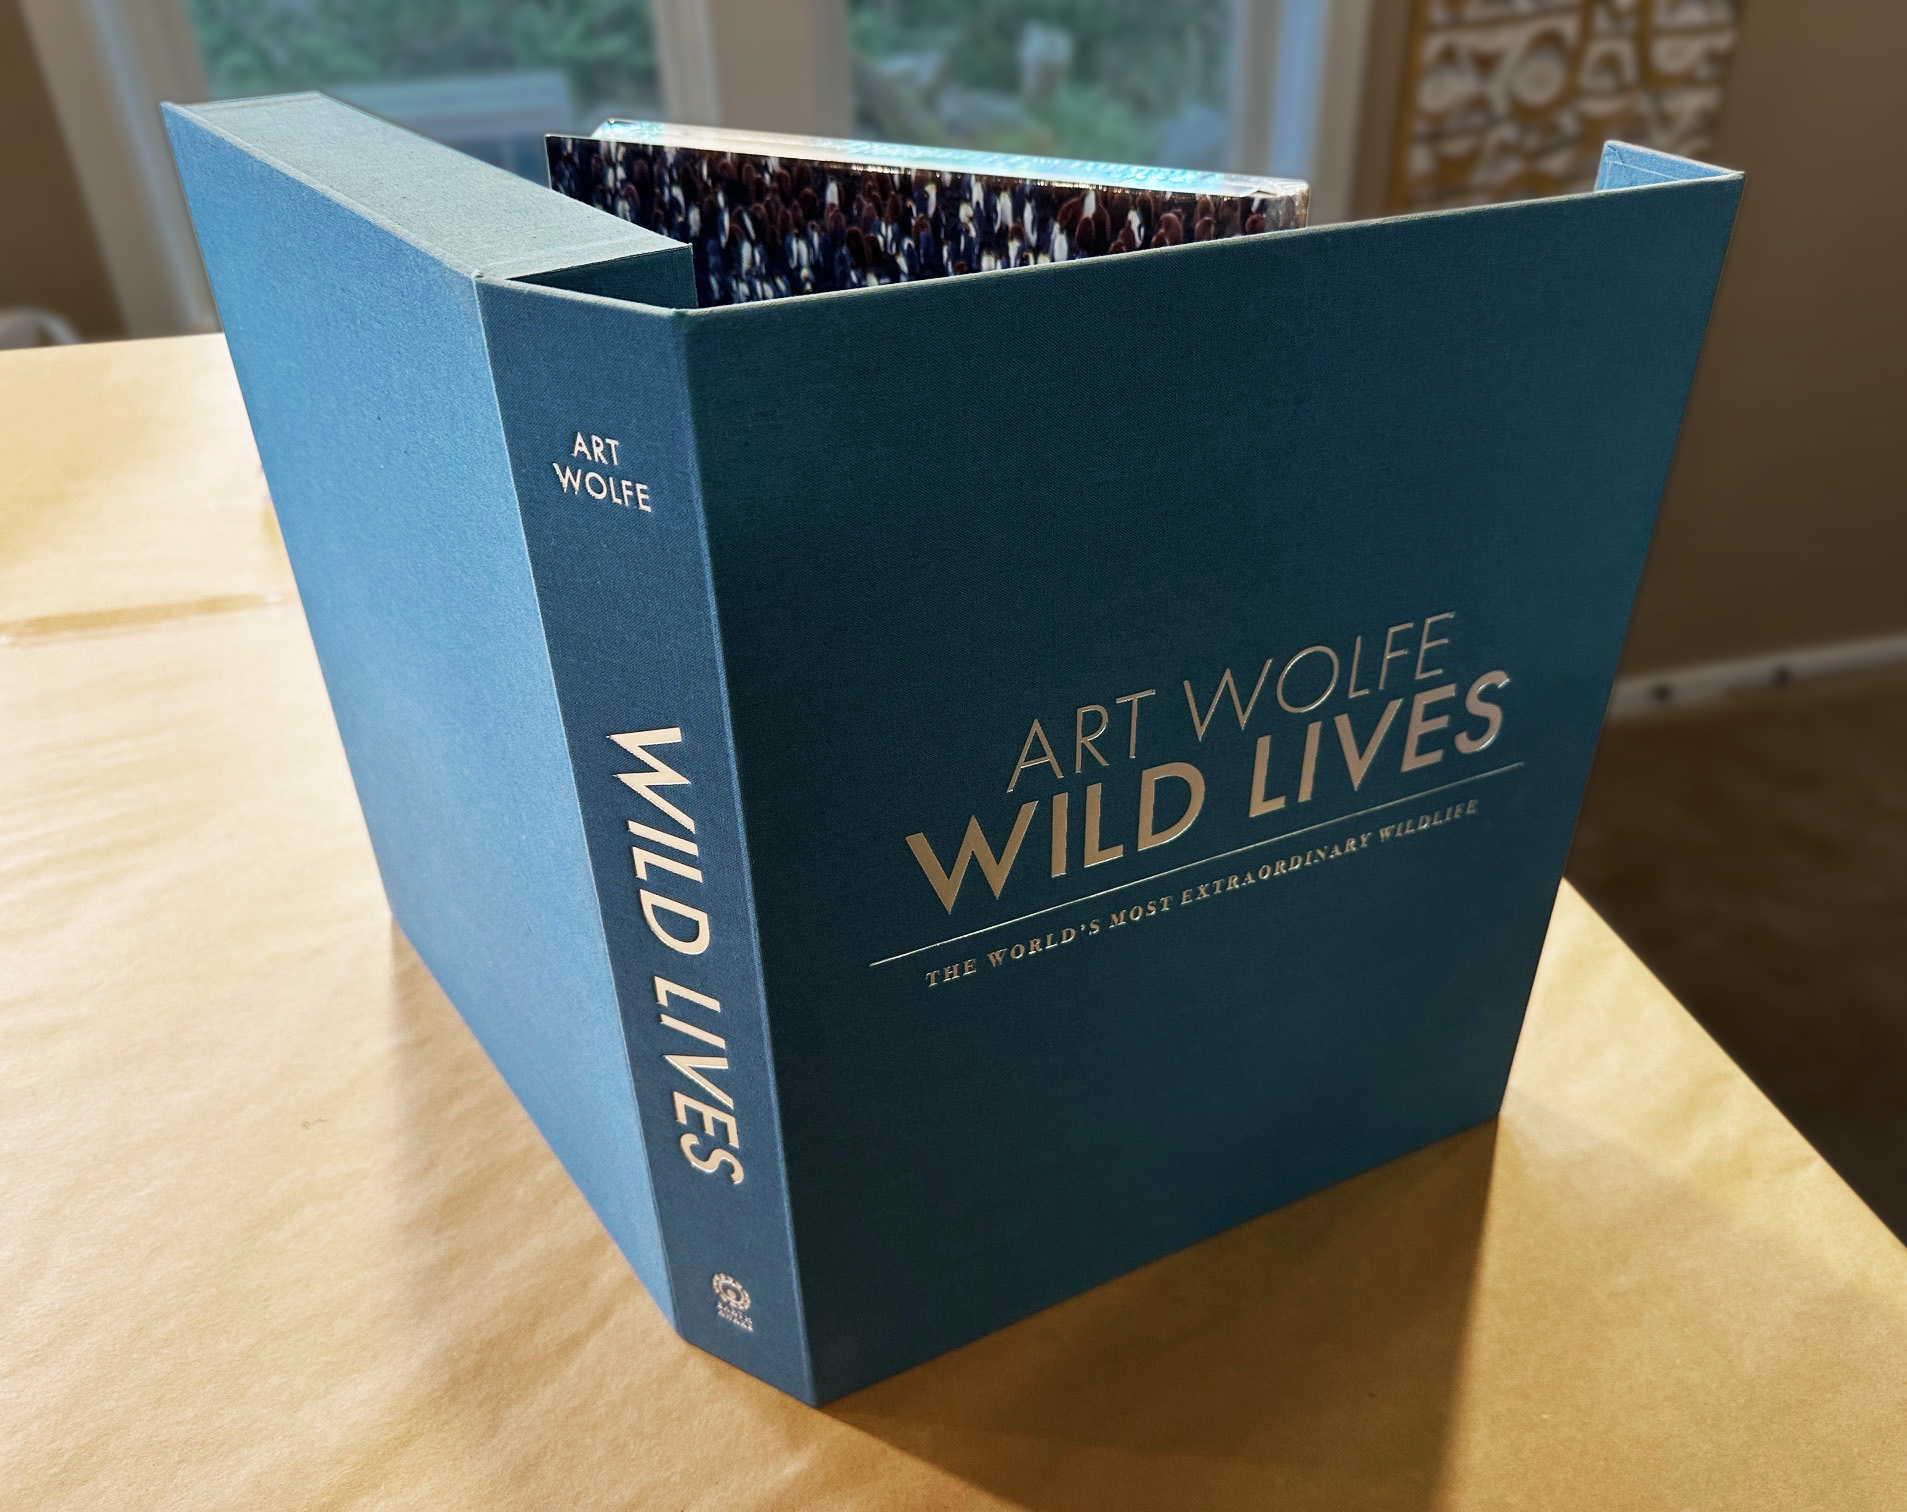 Art Wolfe's Wild Lives - Collector's Edition Book, Print, & Clamshell case.